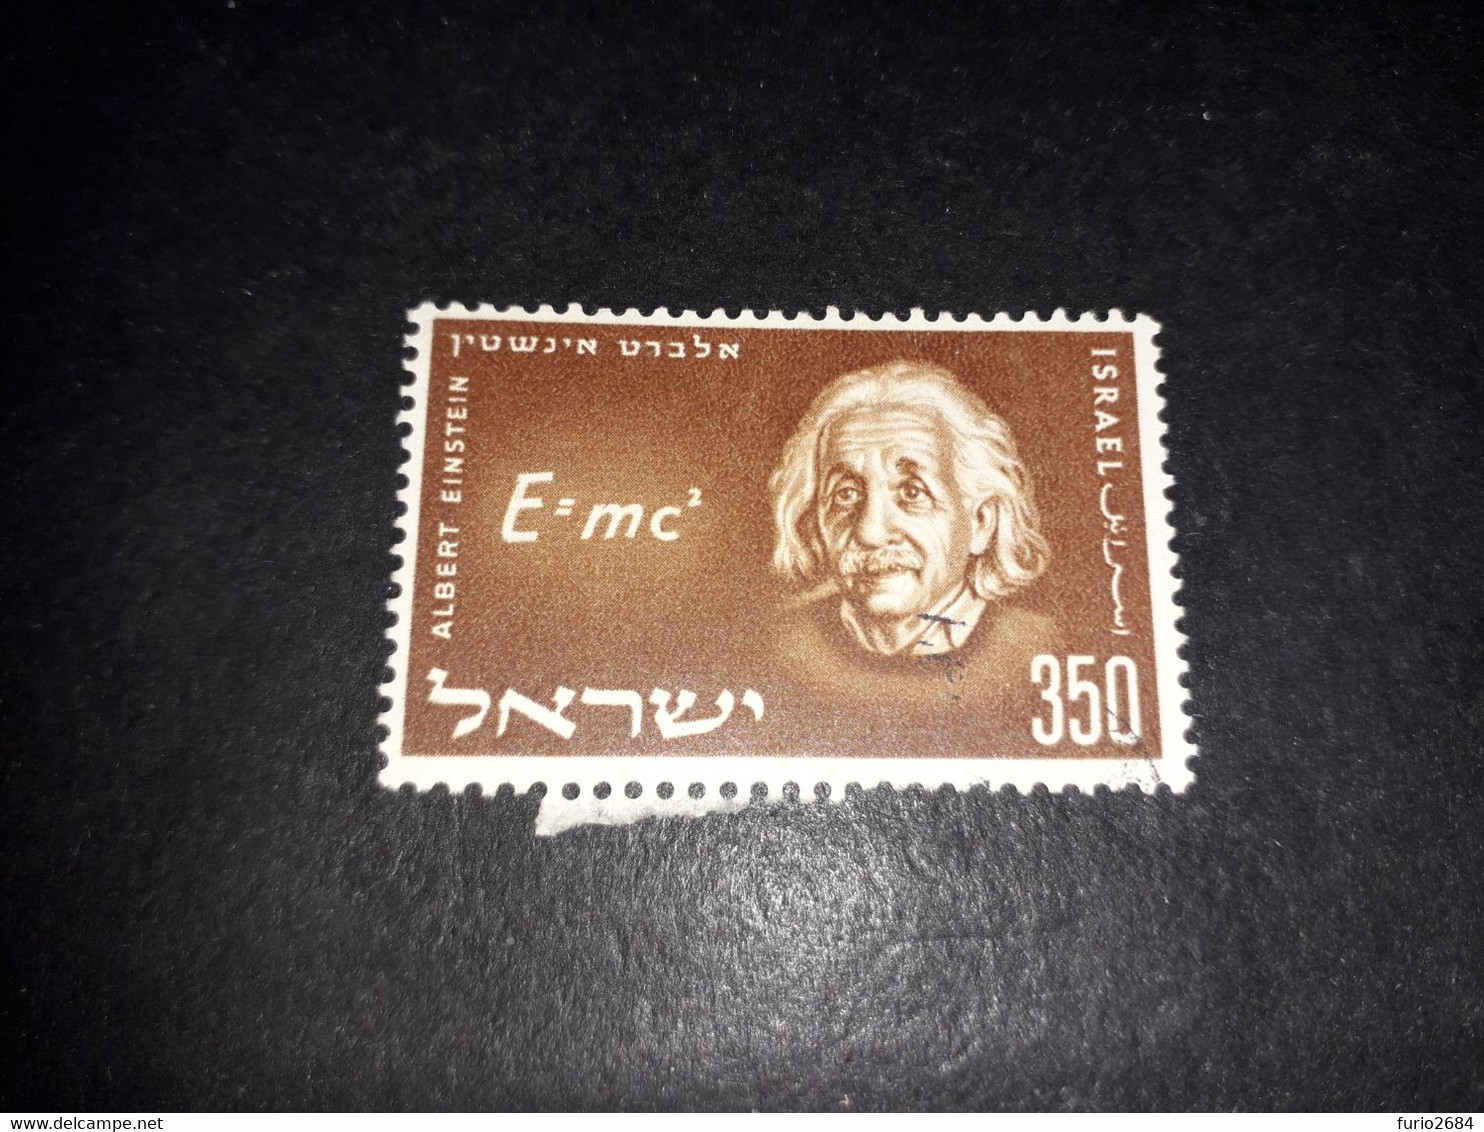 06AL03 ISRAELE 1 VALORE "O" - Used Stamps (without Tabs)